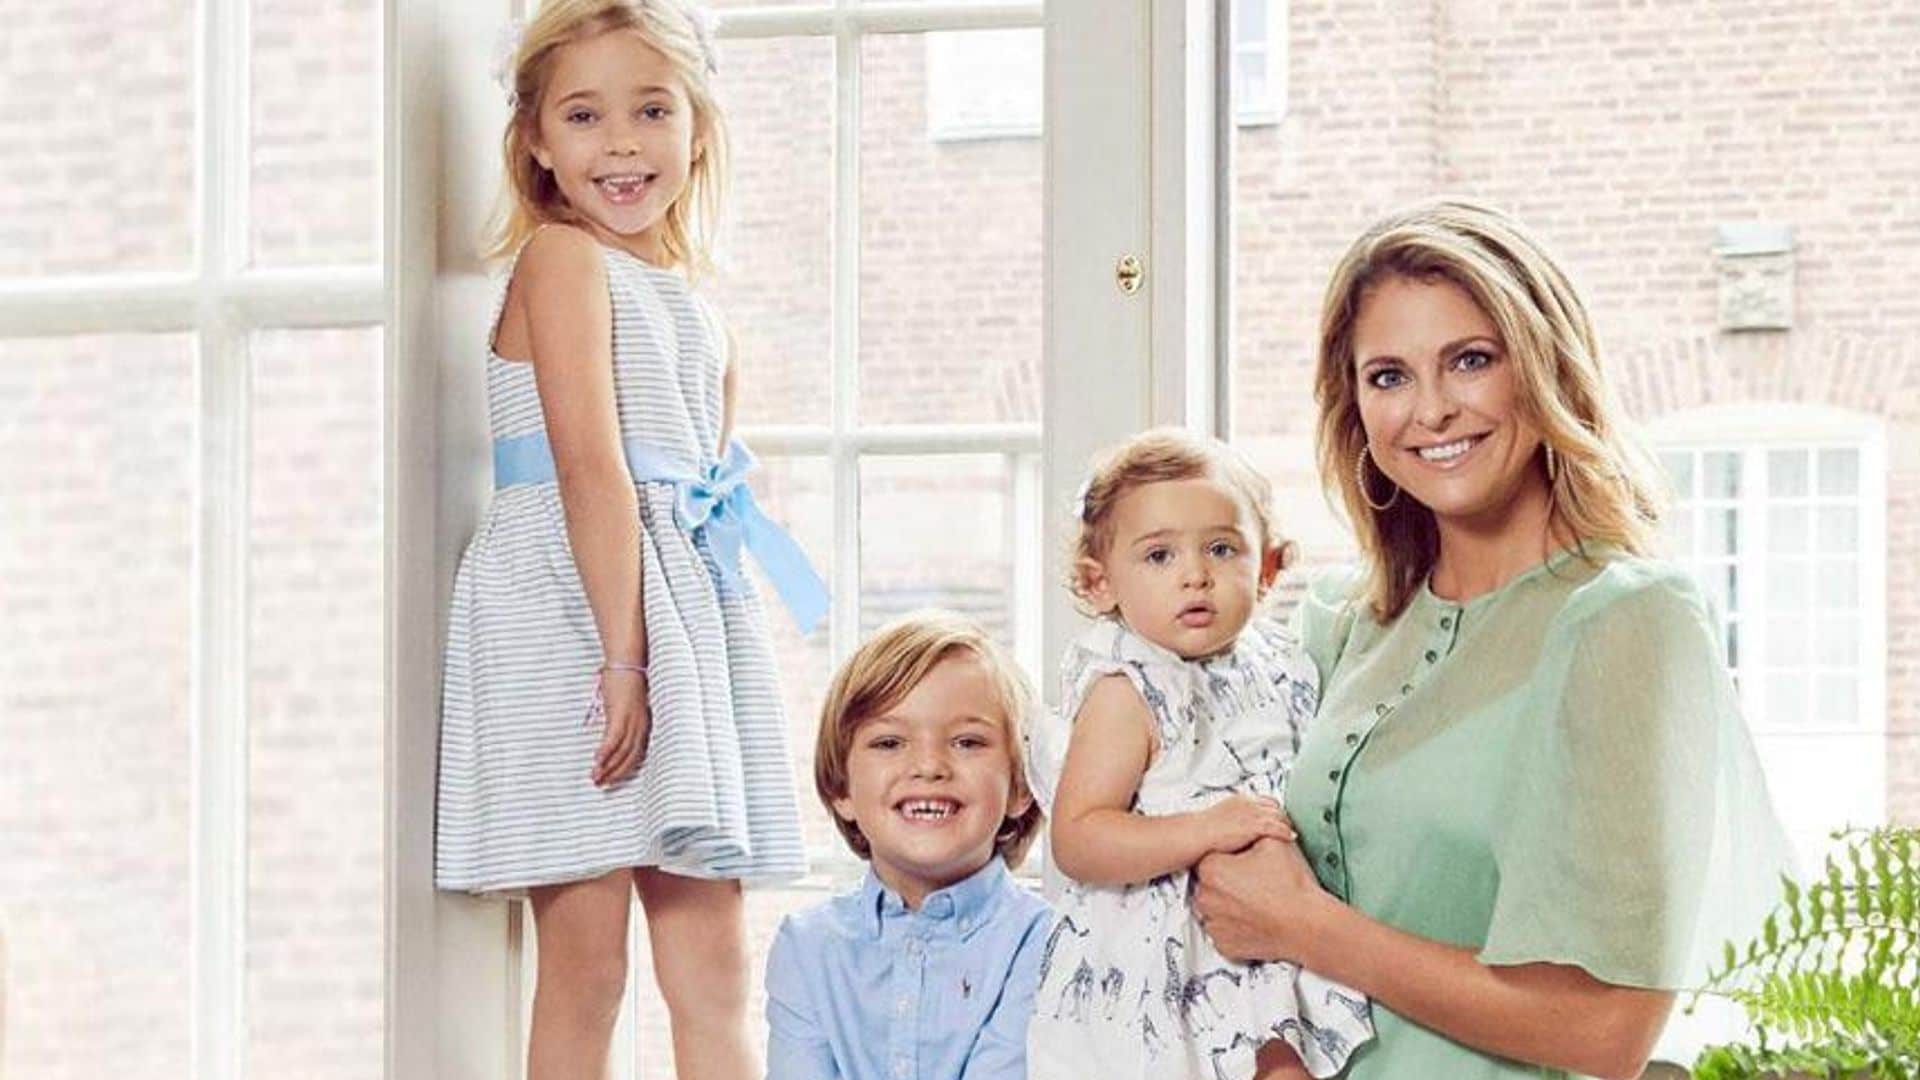 Princess Madeleine of Sweden and family have two weeks to move out of their Miami home